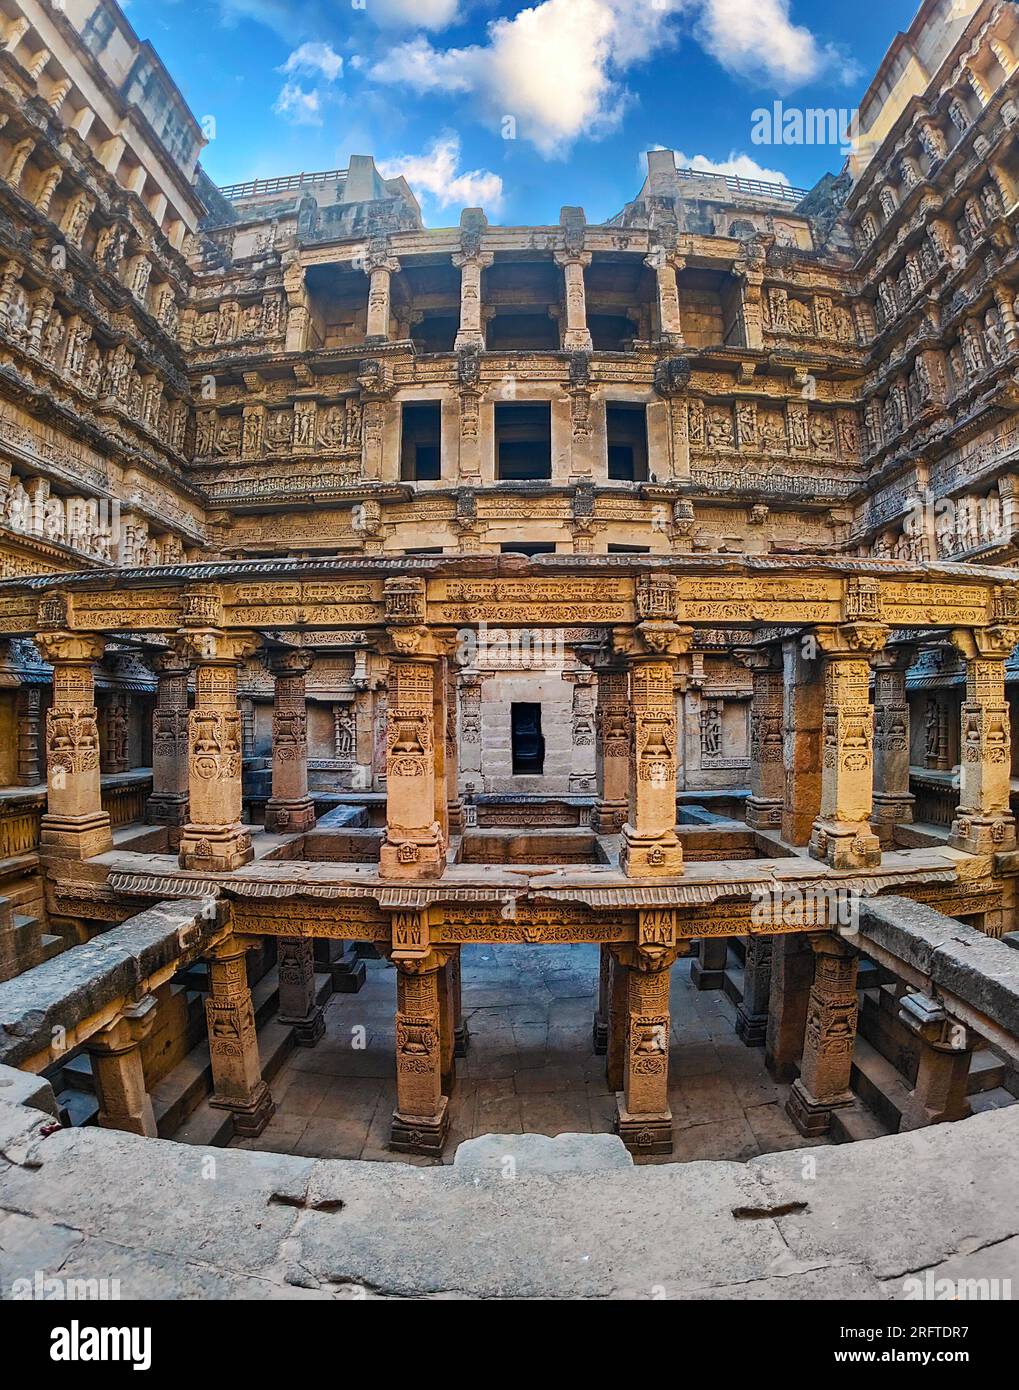 Rani ki Vav, a remarkable architectural masterpiece situated in the state of Gujarat, India, Stock Photo